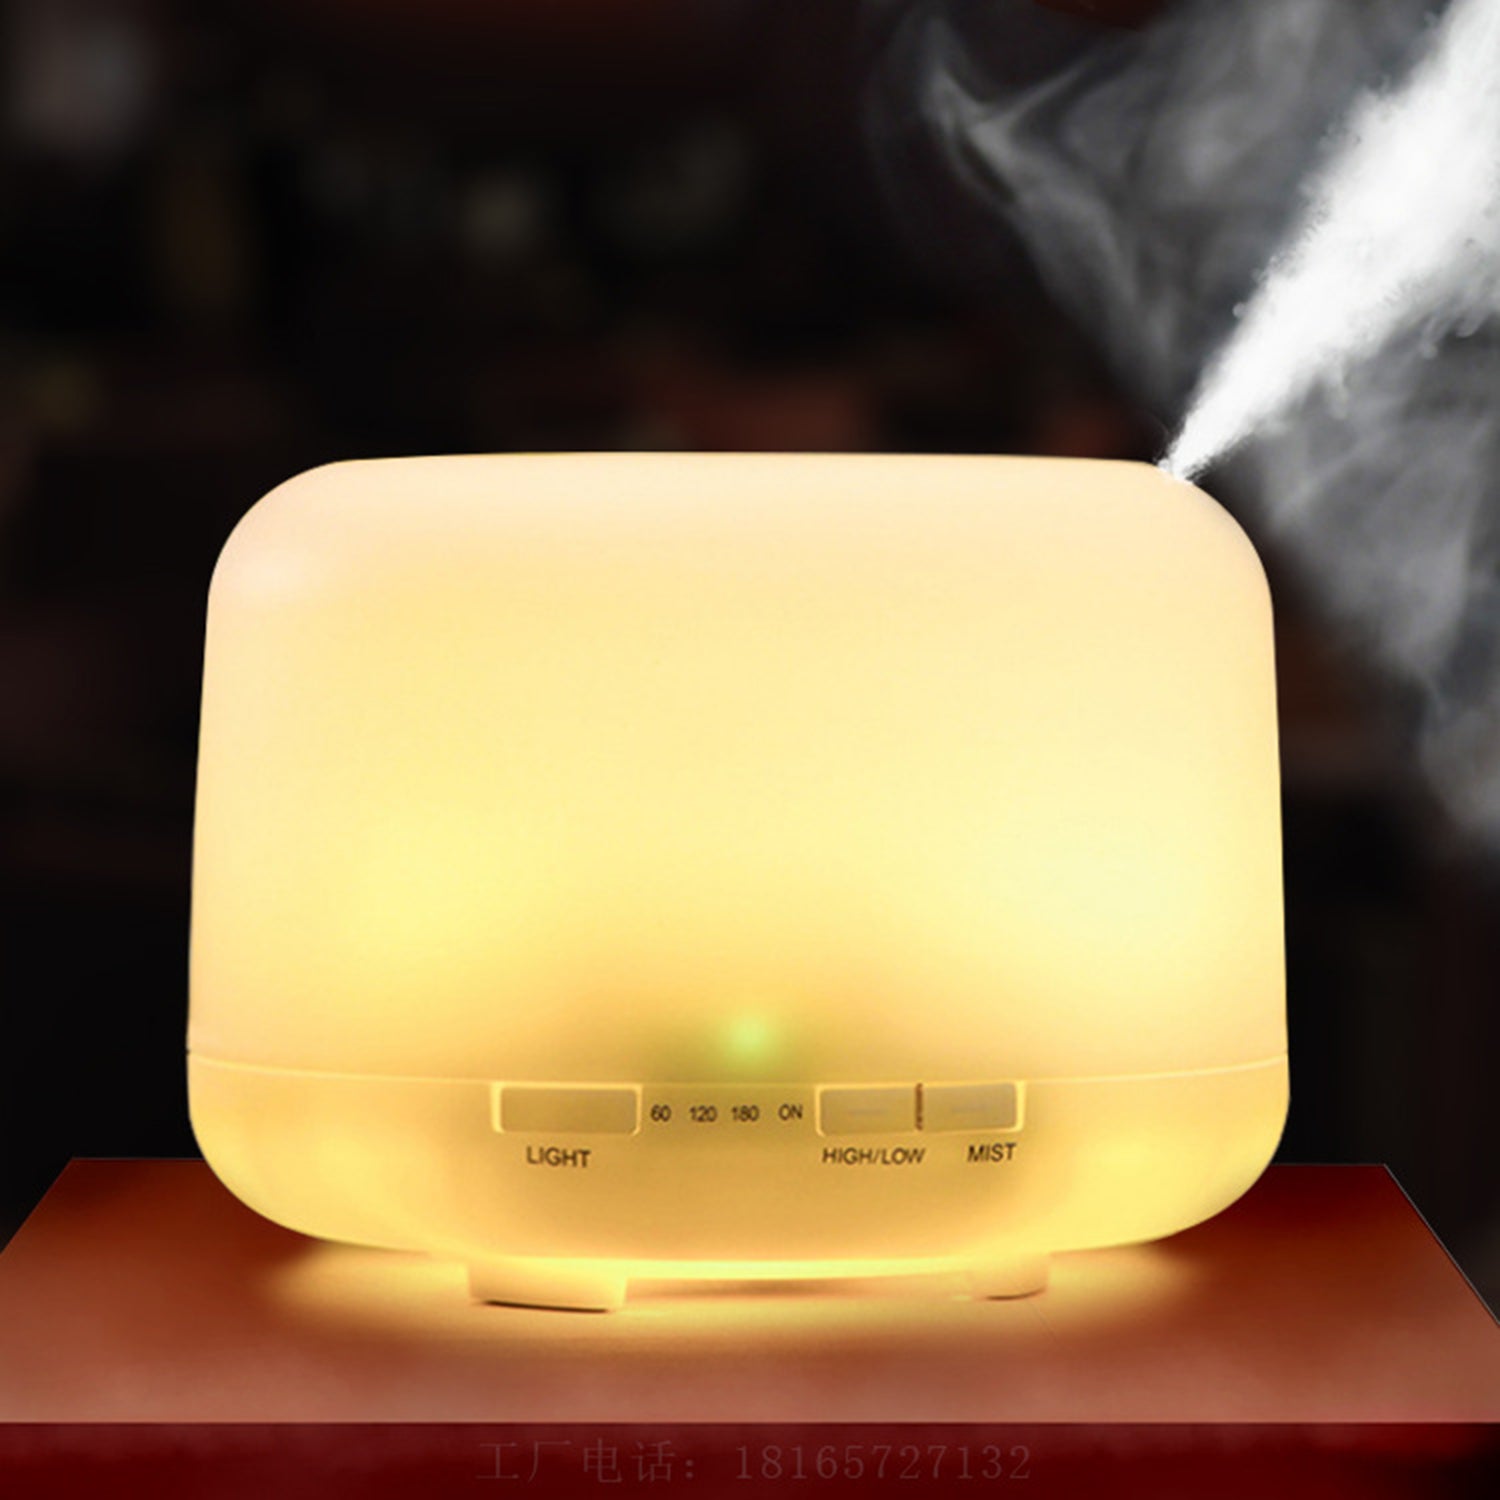 Ultrasonic Aromatherapy Diffuser Essential Oil Humidifier 500ML Night Light with Remote Control - SG Plug Humidifer OEM 